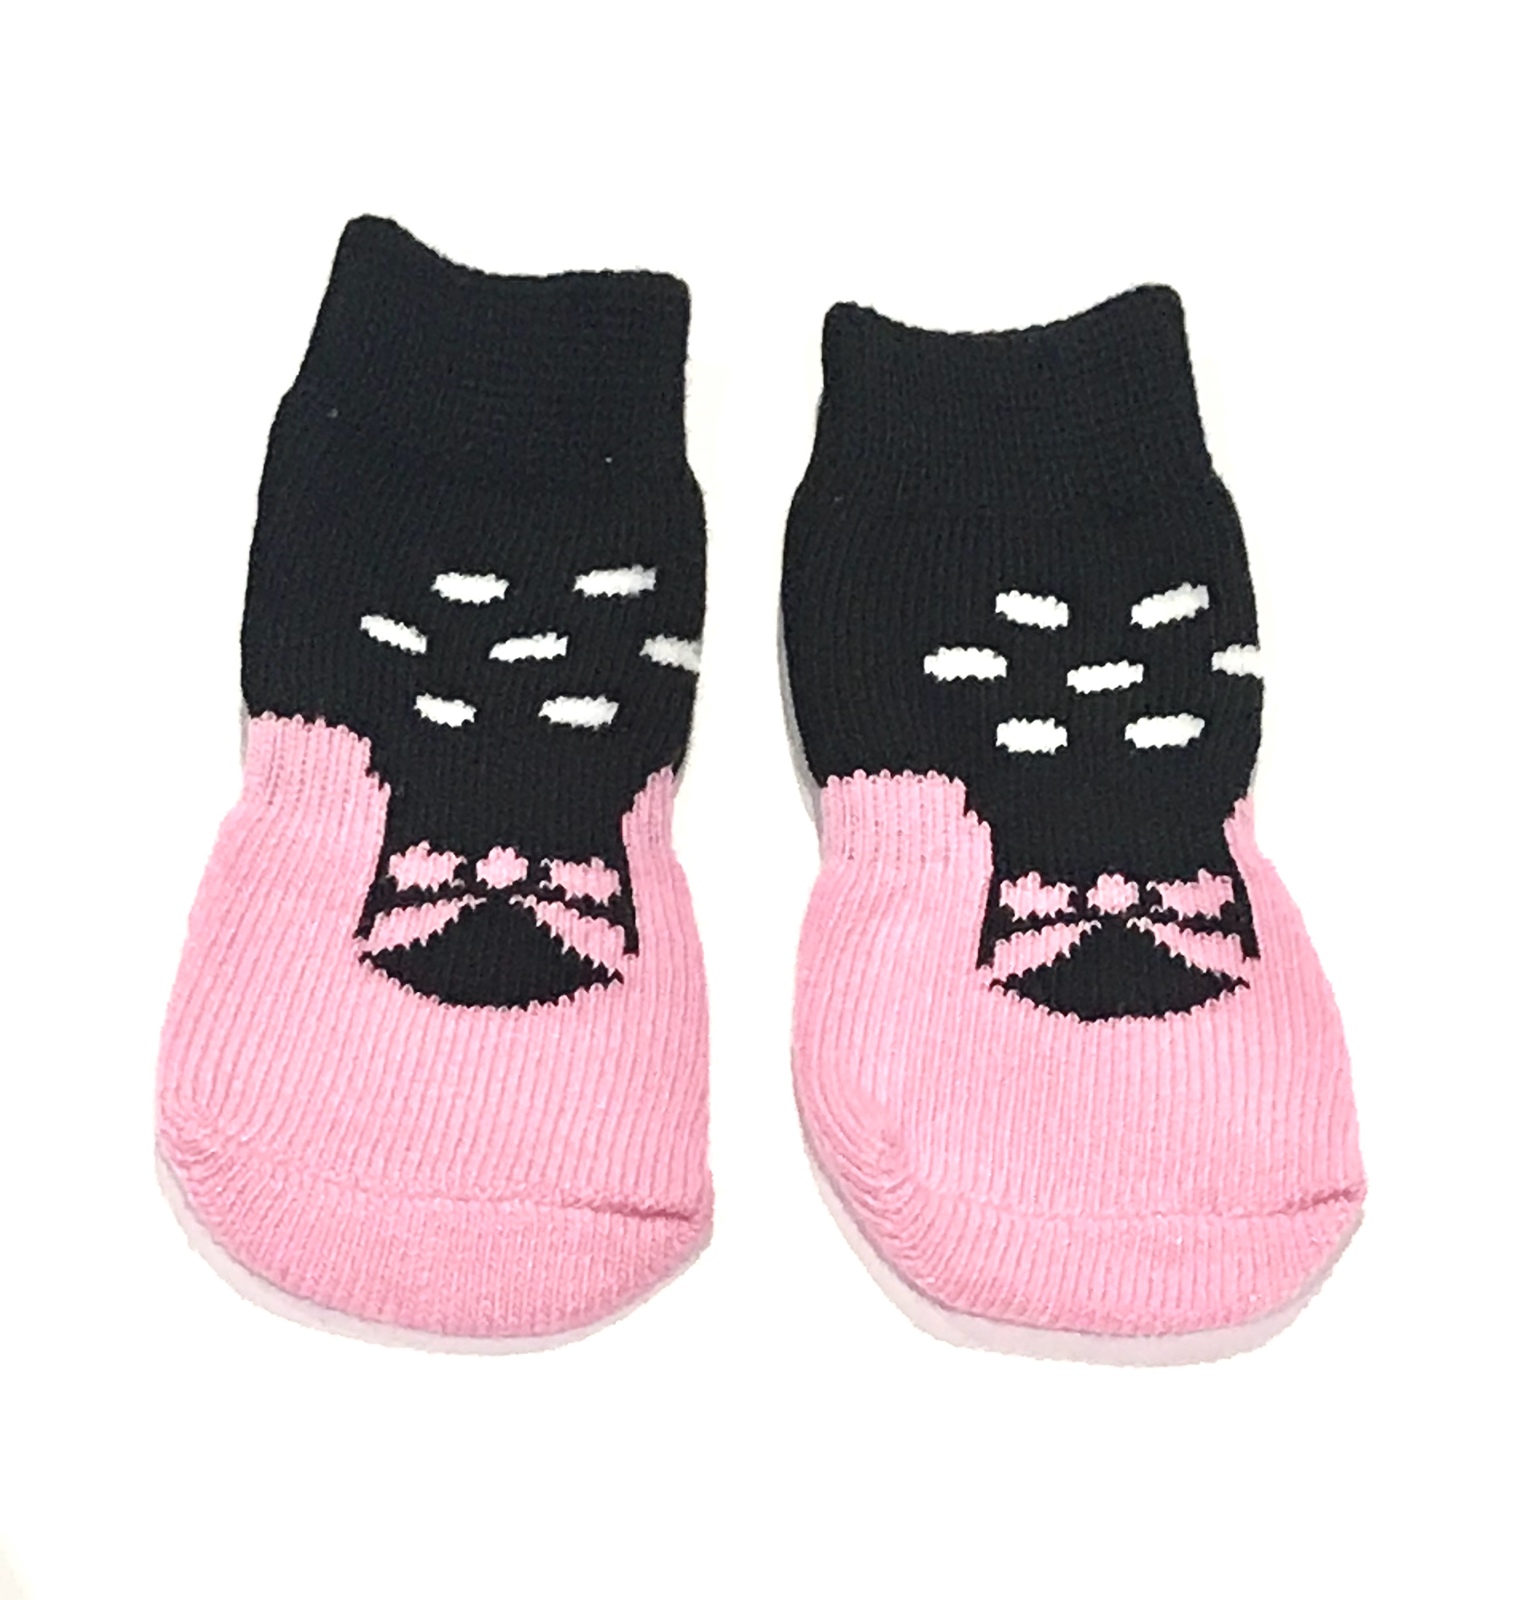 Dog Socks - Protect Floors and Paws **Over 30 Styles to choose from ...